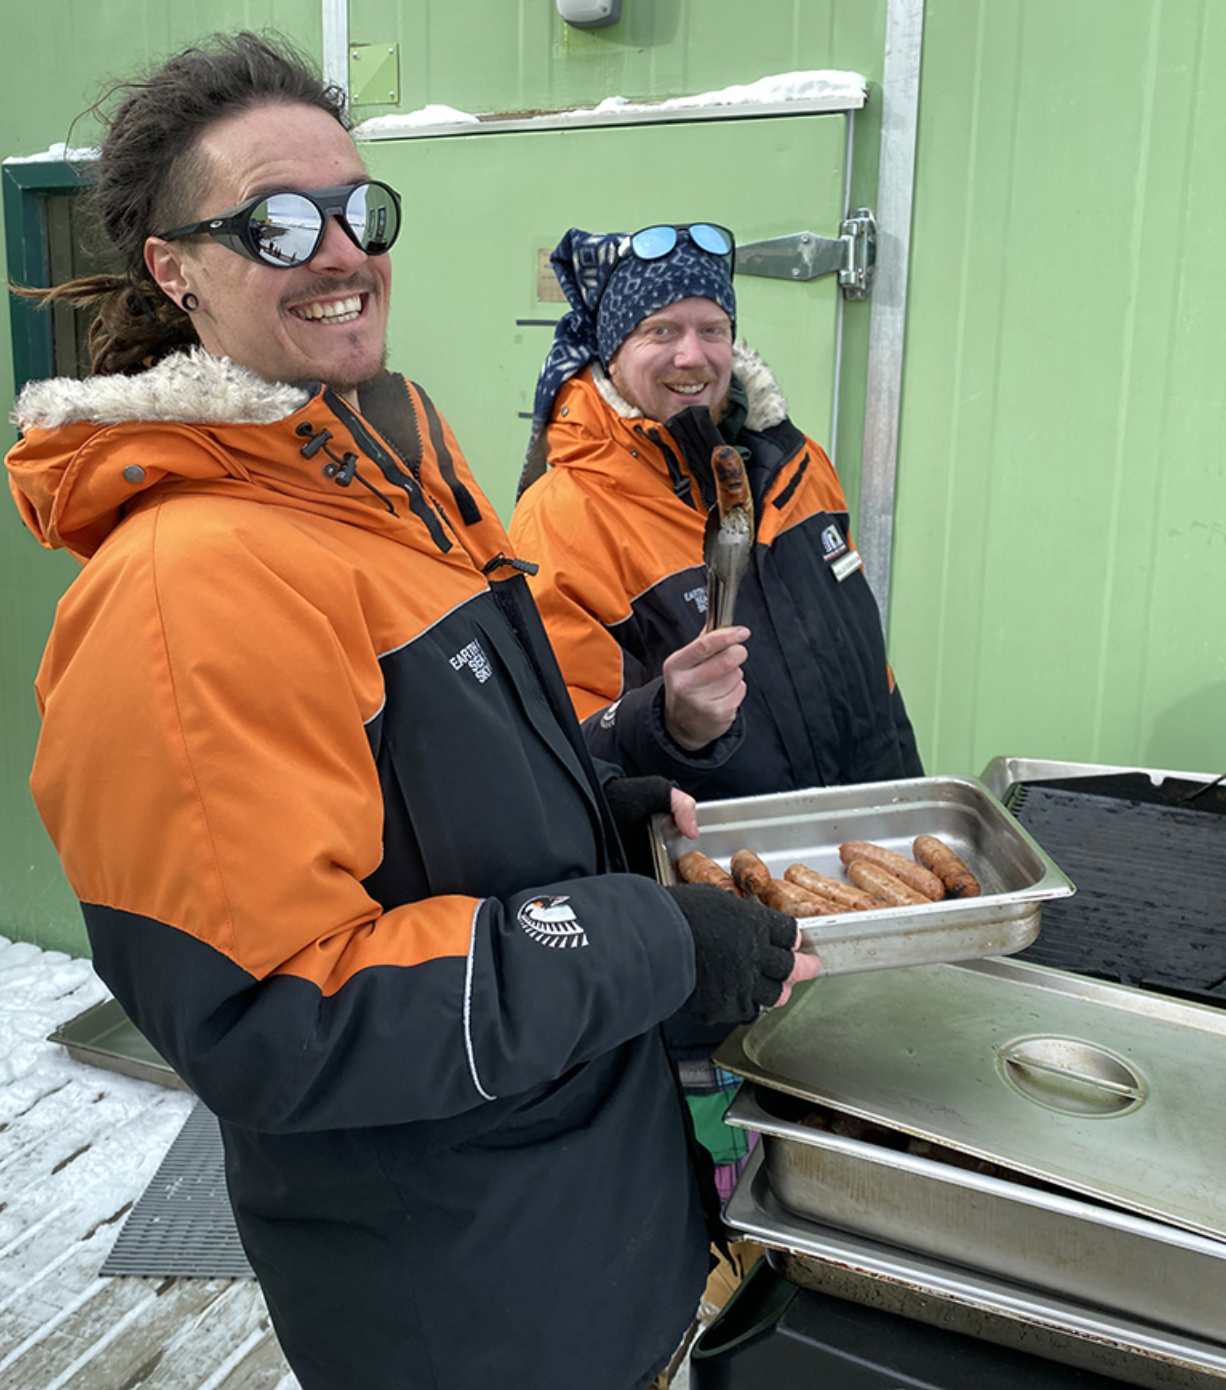 “In Antarctica, research centers ‘heat their refrigerators’ to avoid food from over-freezing and allow for thawing to take place and much of the food served to researchers is often expired.”